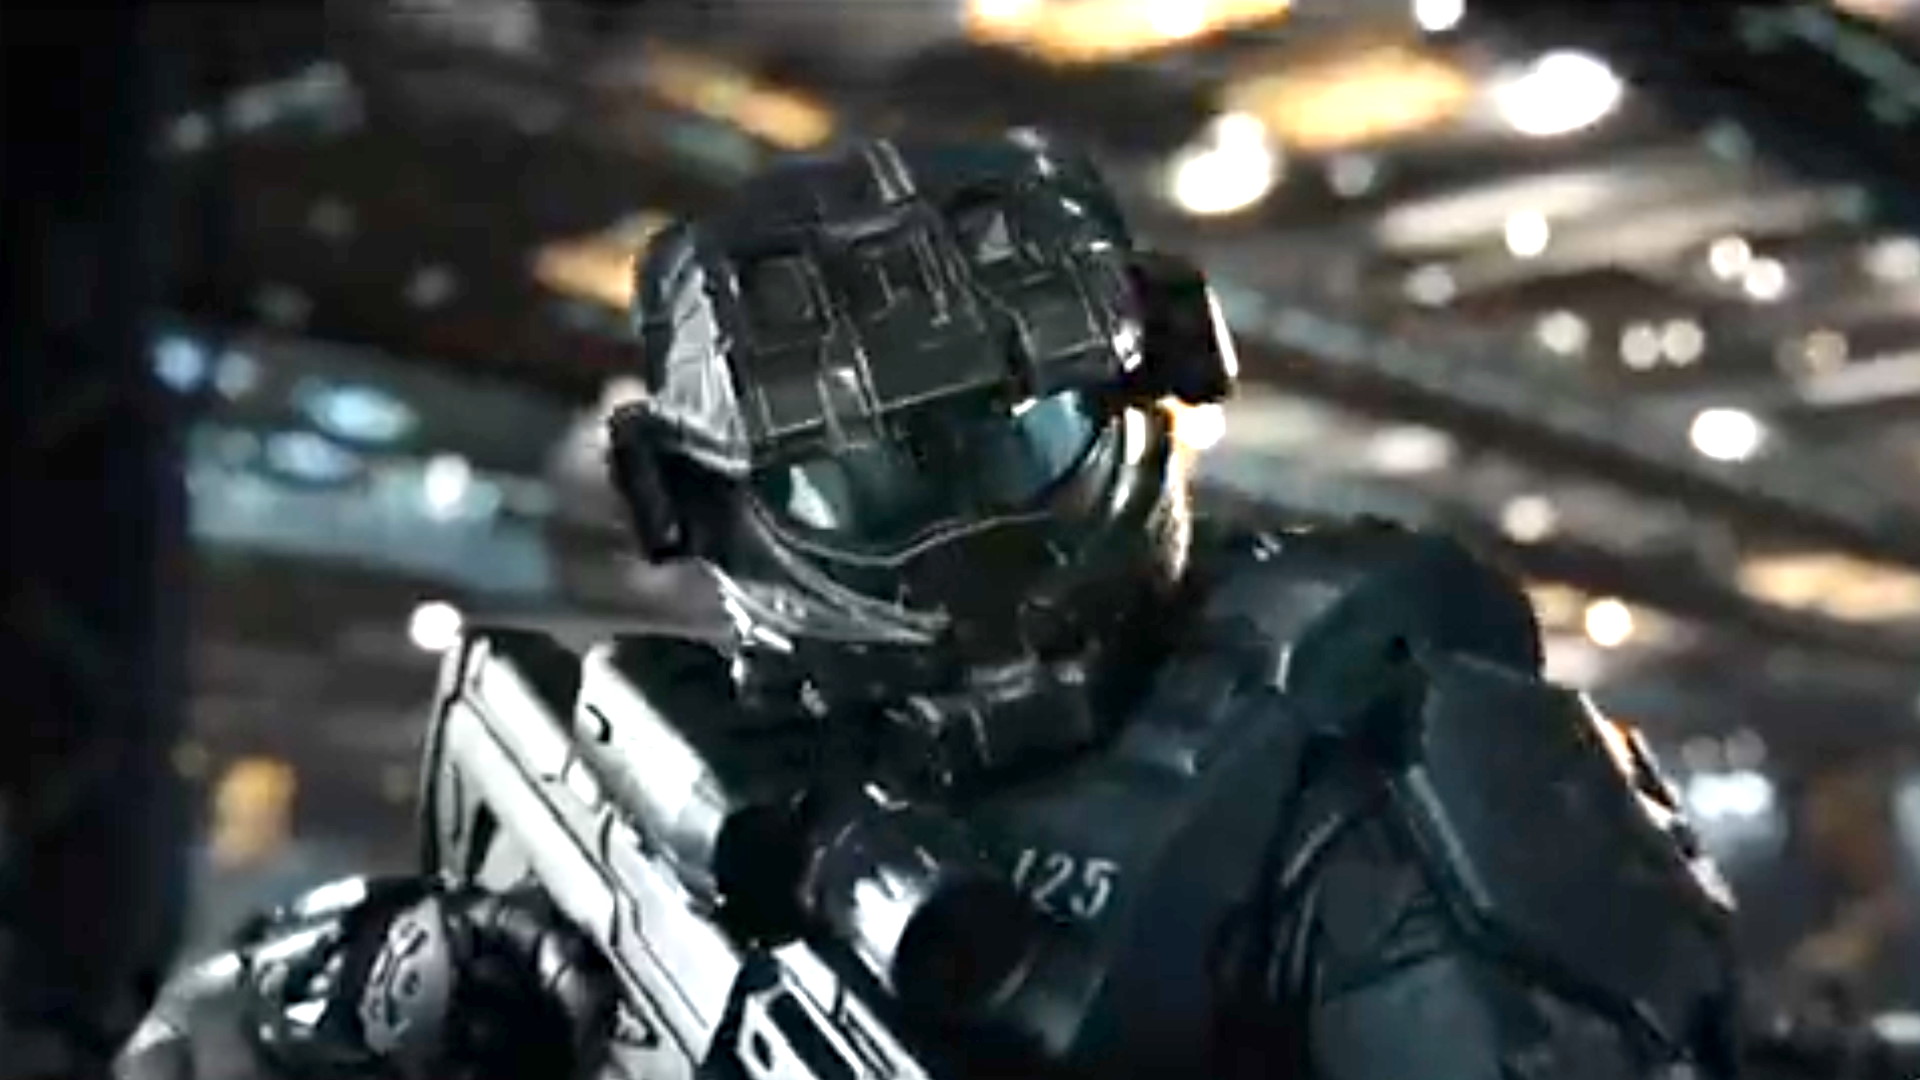 Halo TV Series Release Date Revealed on Paramount+